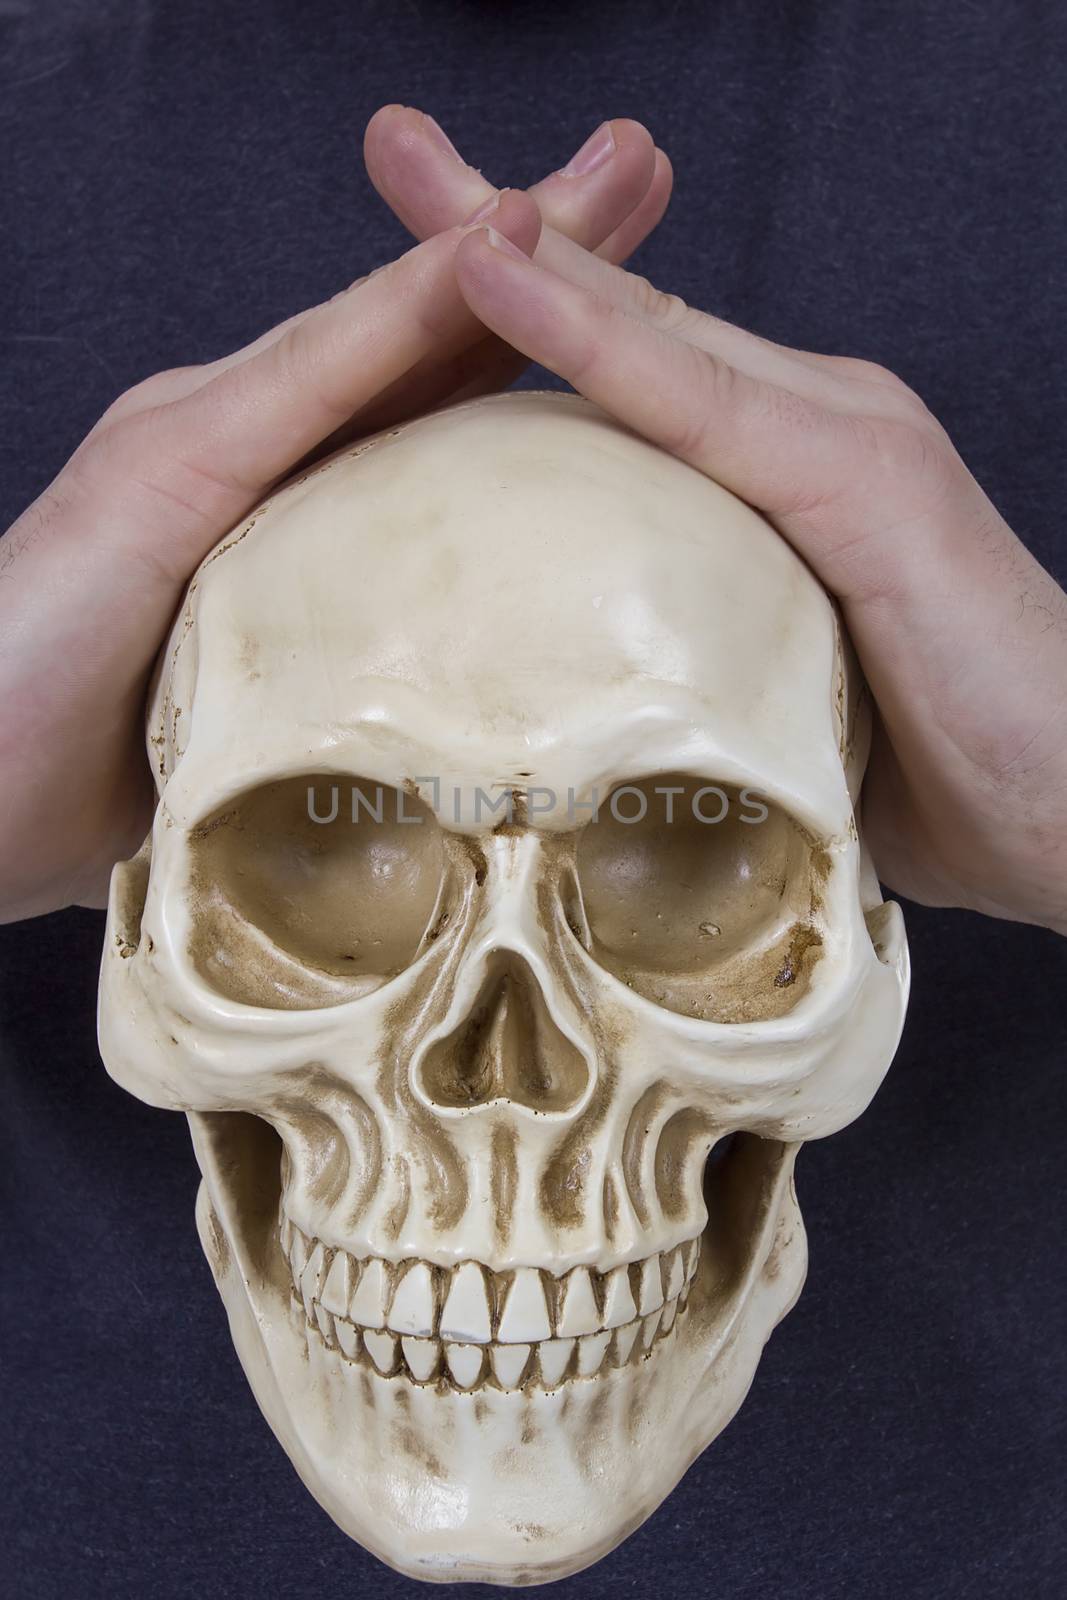 Human skull in human hands on a blue background